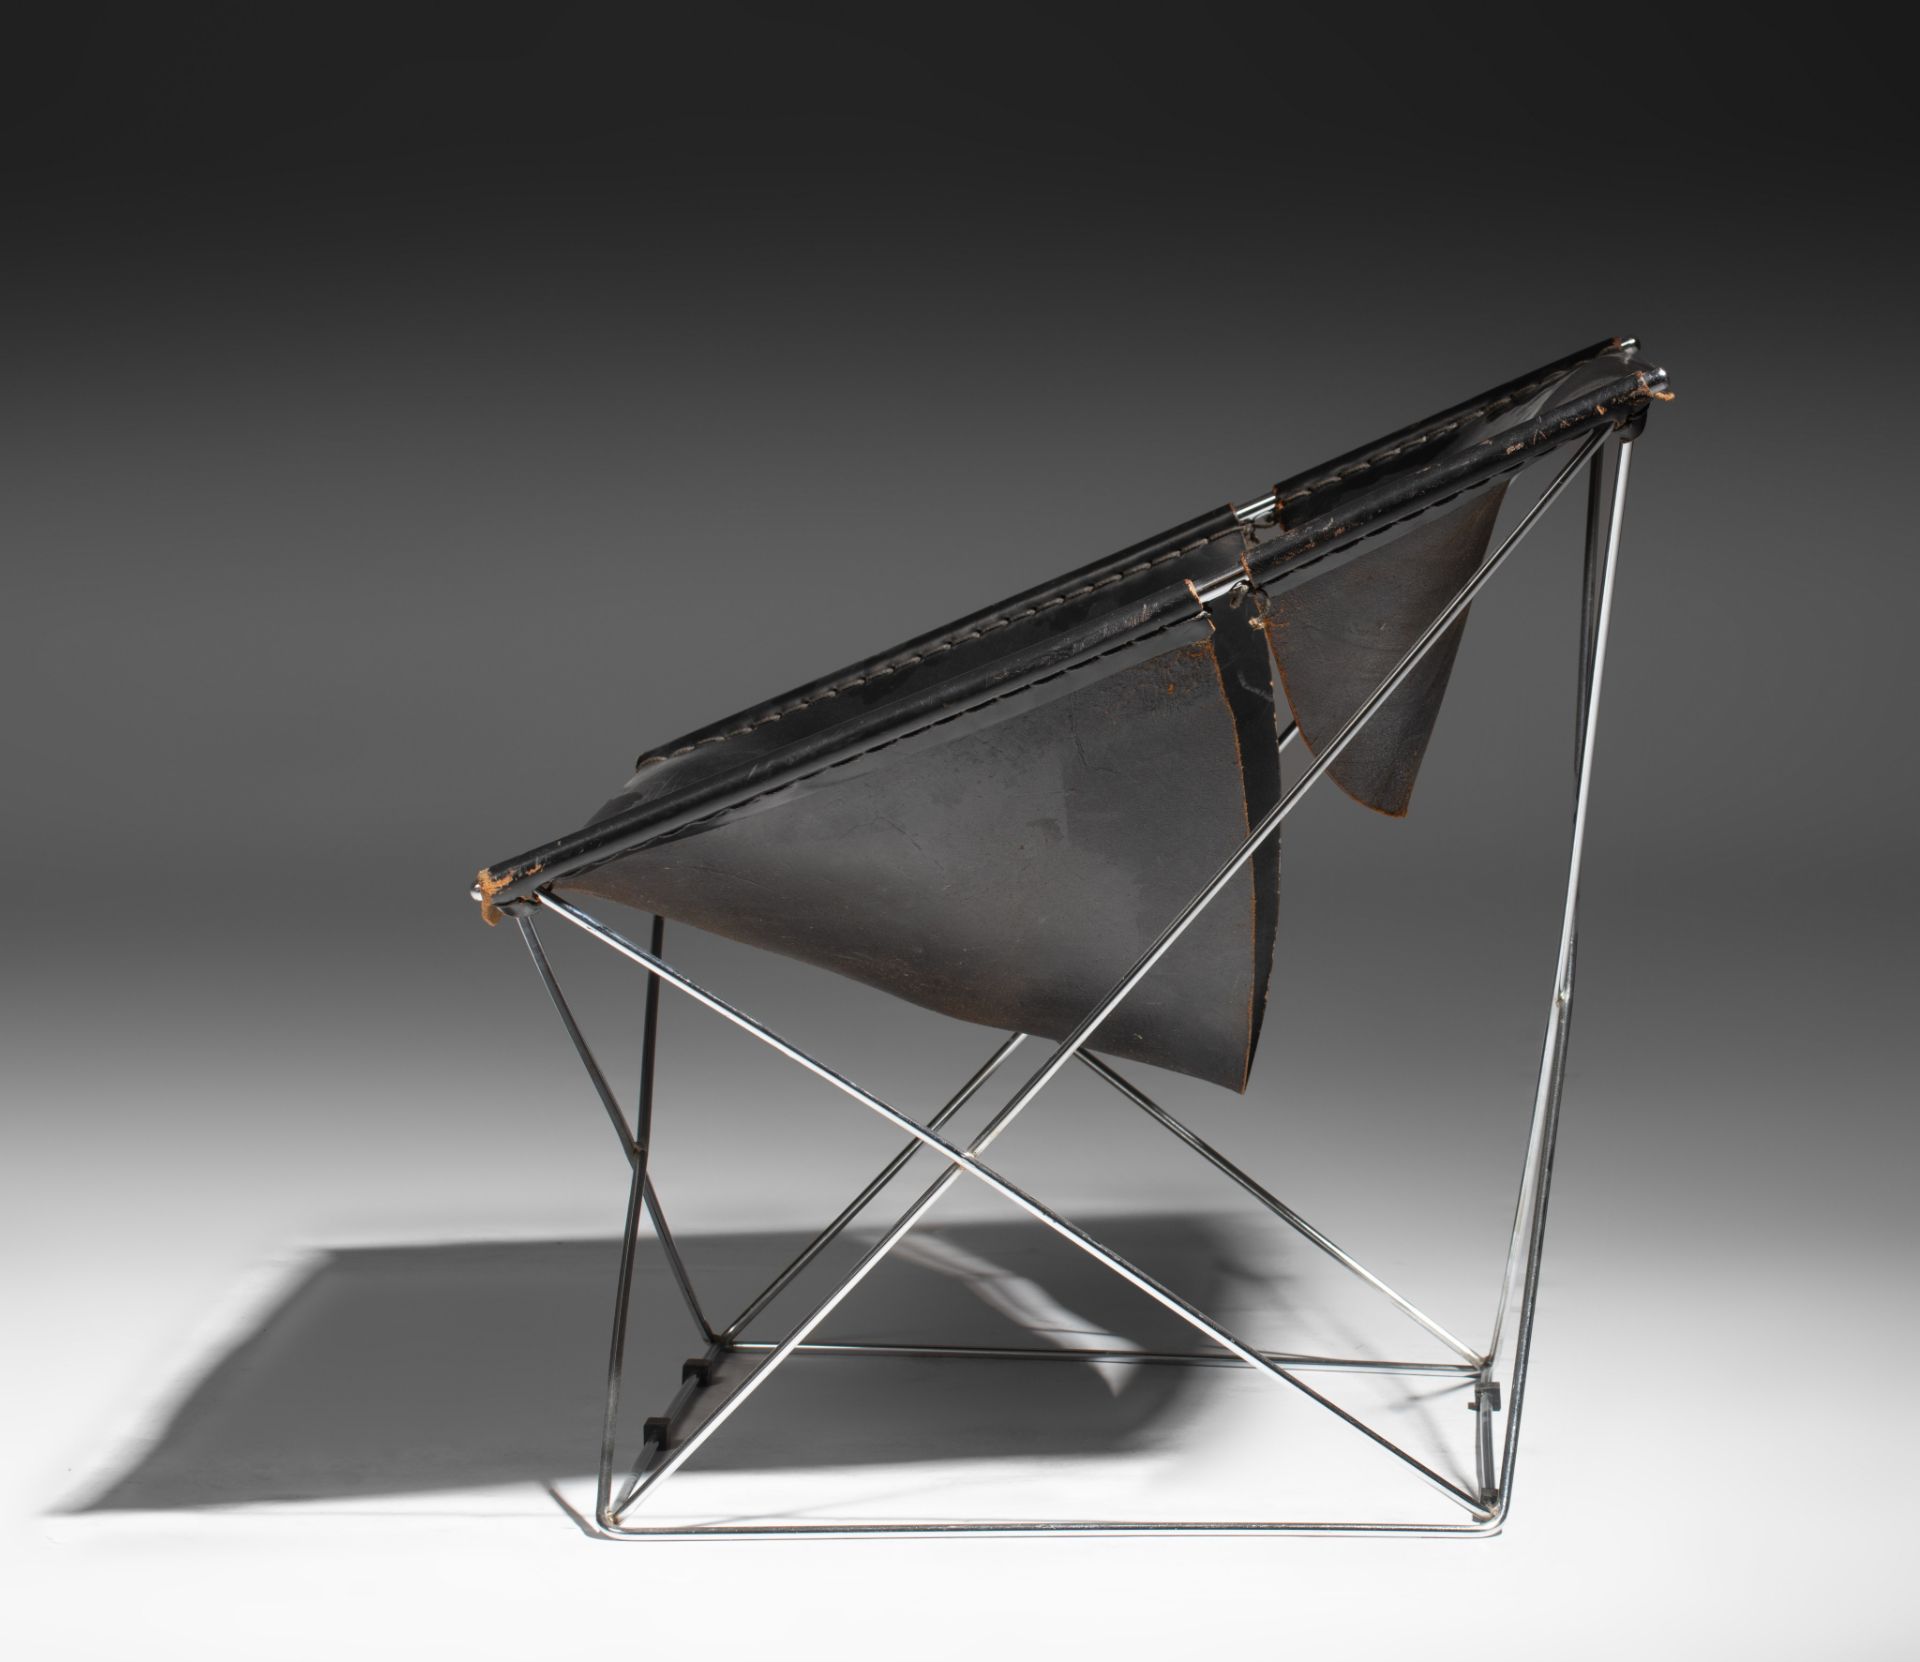 A F675 'butterfly' chair by Pierre Paulin for Polak, 1963, H 65 - W 83 cm - Image 3 of 10